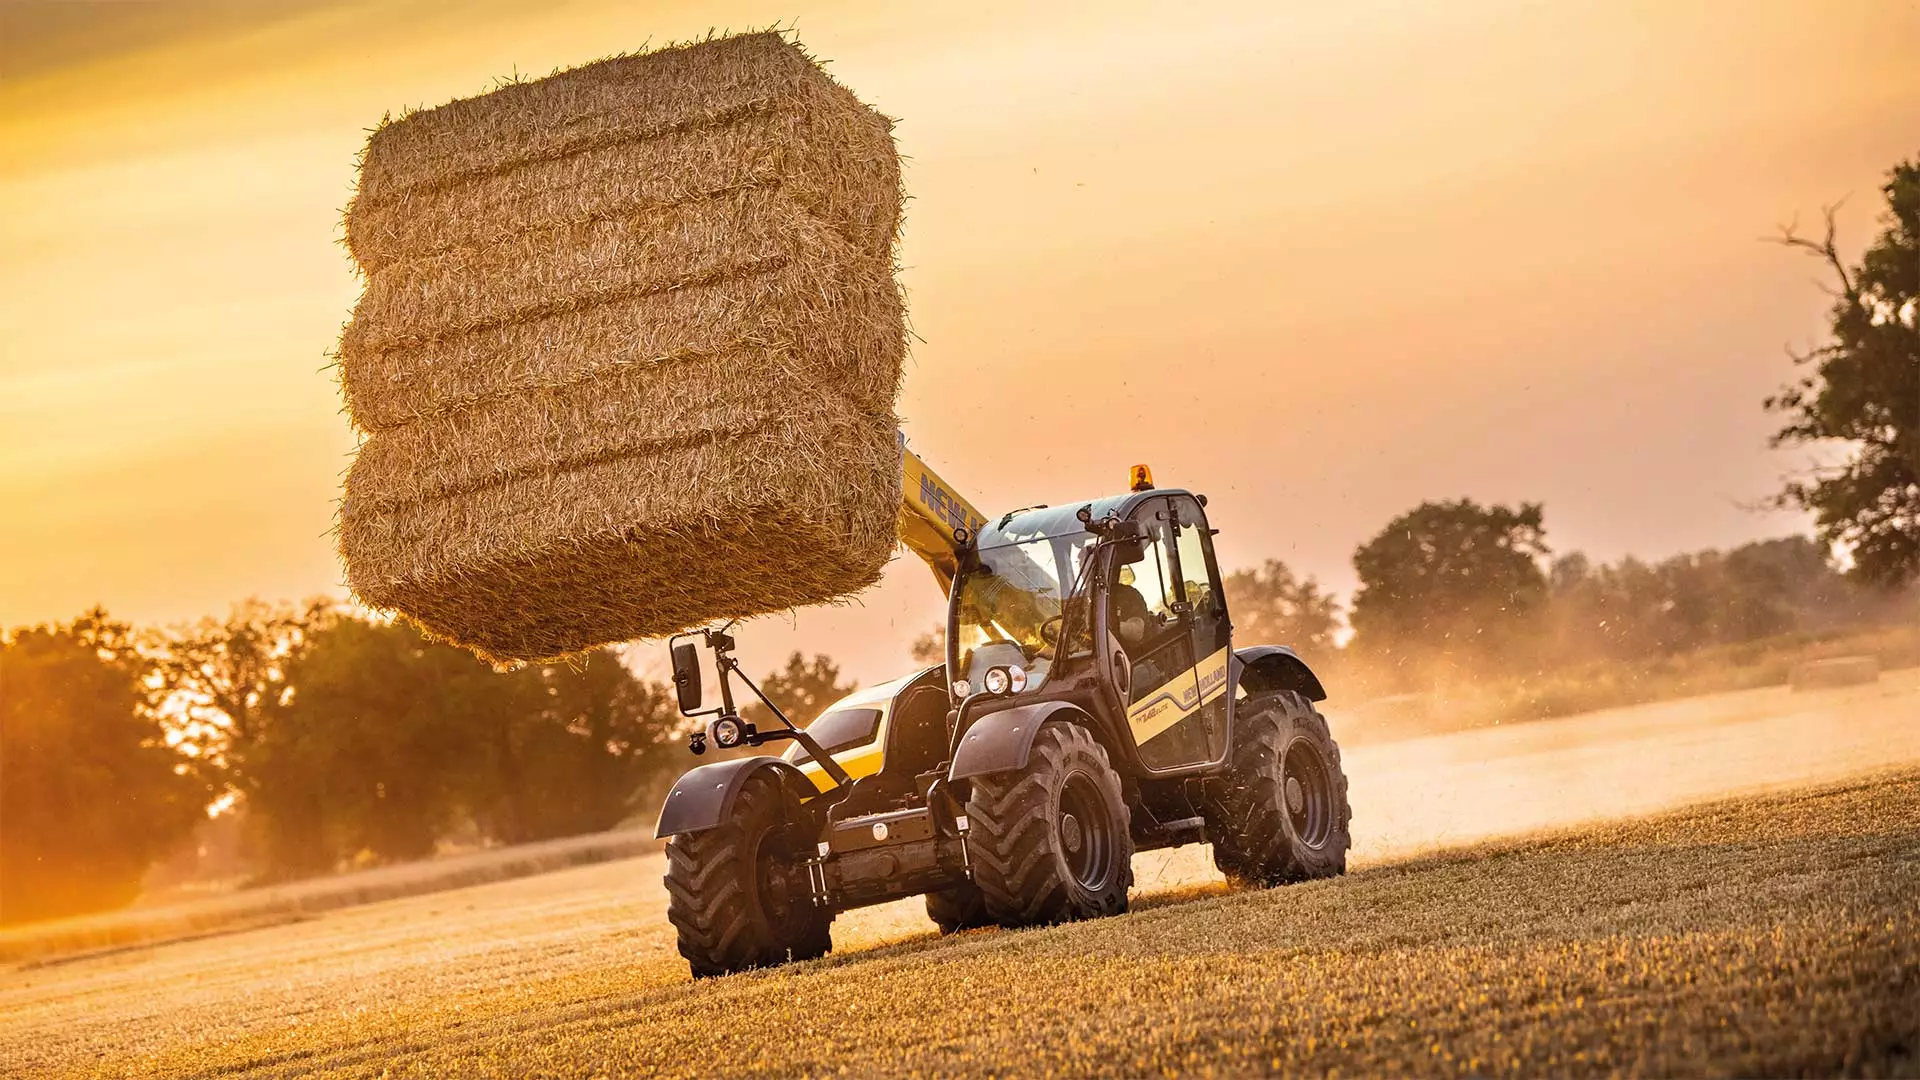 Agricultural telehandler lifting large hay bale at sunset in a farm field.